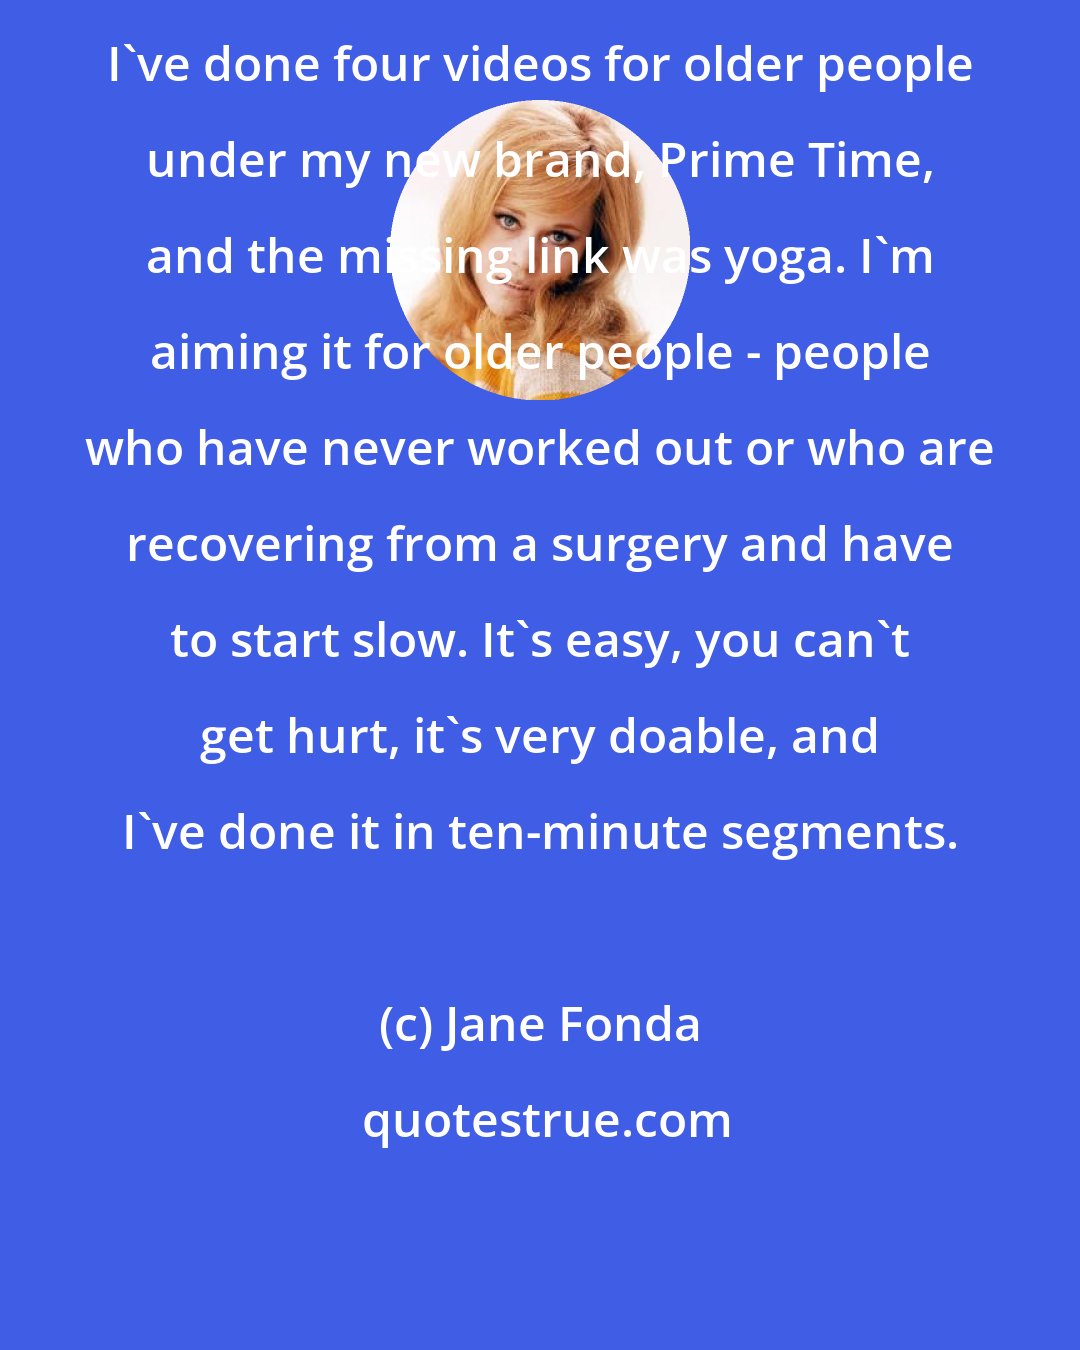 Jane Fonda: I've done four videos for older people under my new brand, Prime Time, and the missing link was yoga. I'm aiming it for older people - people who have never worked out or who are recovering from a surgery and have to start slow. It's easy, you can't get hurt, it's very doable, and I've done it in ten-minute segments.